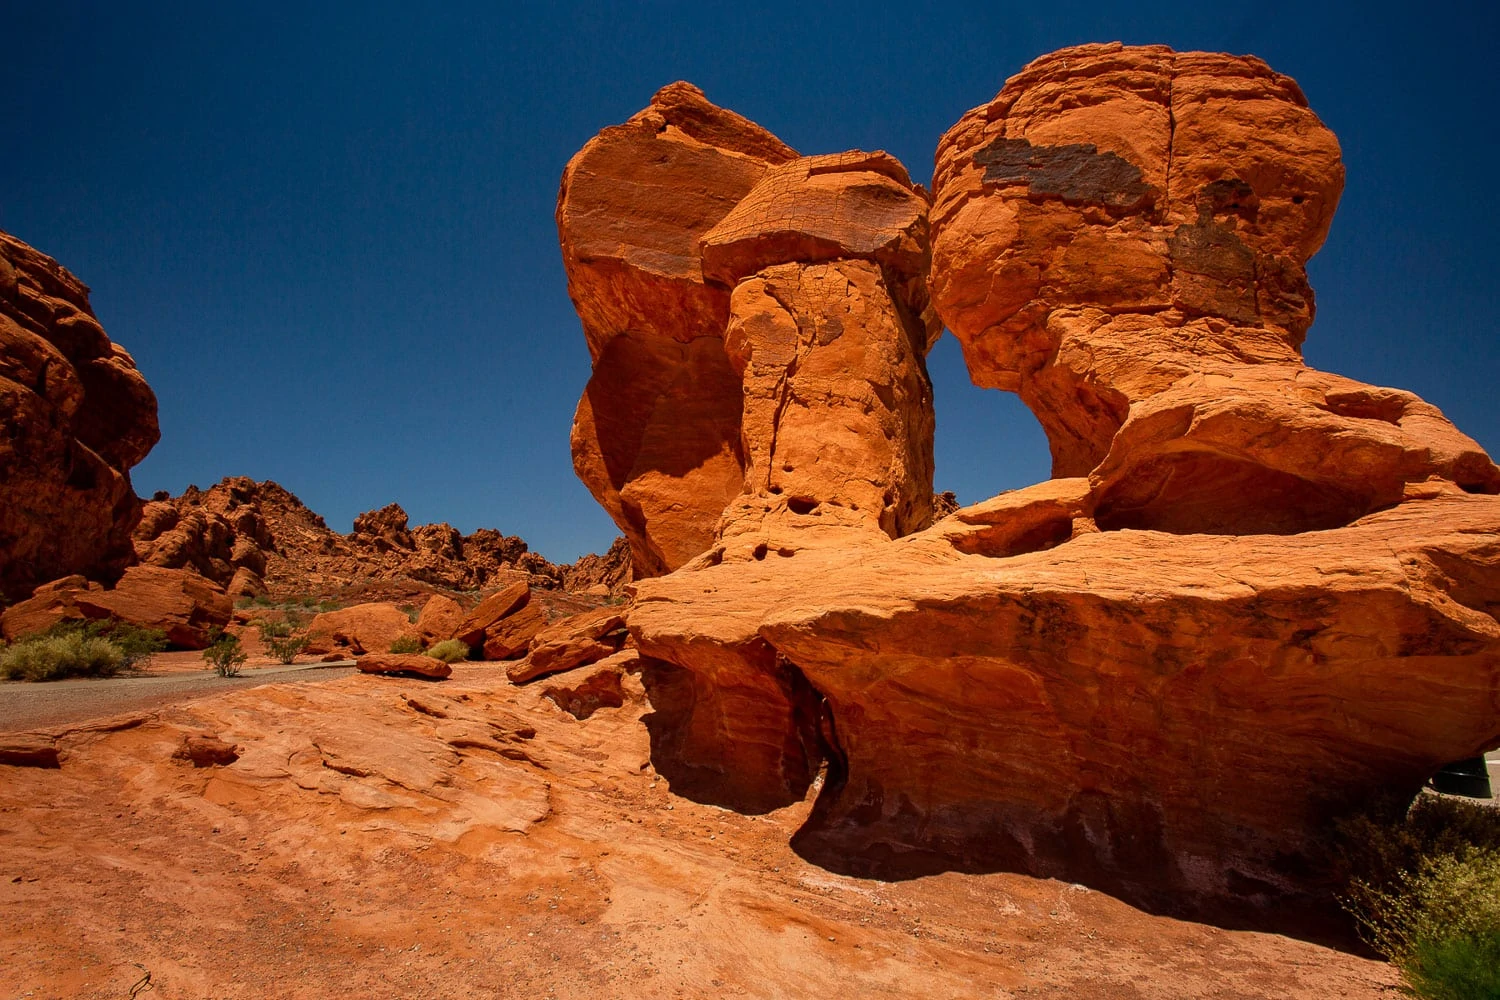 Colorful red rock formations set against a blue sky.